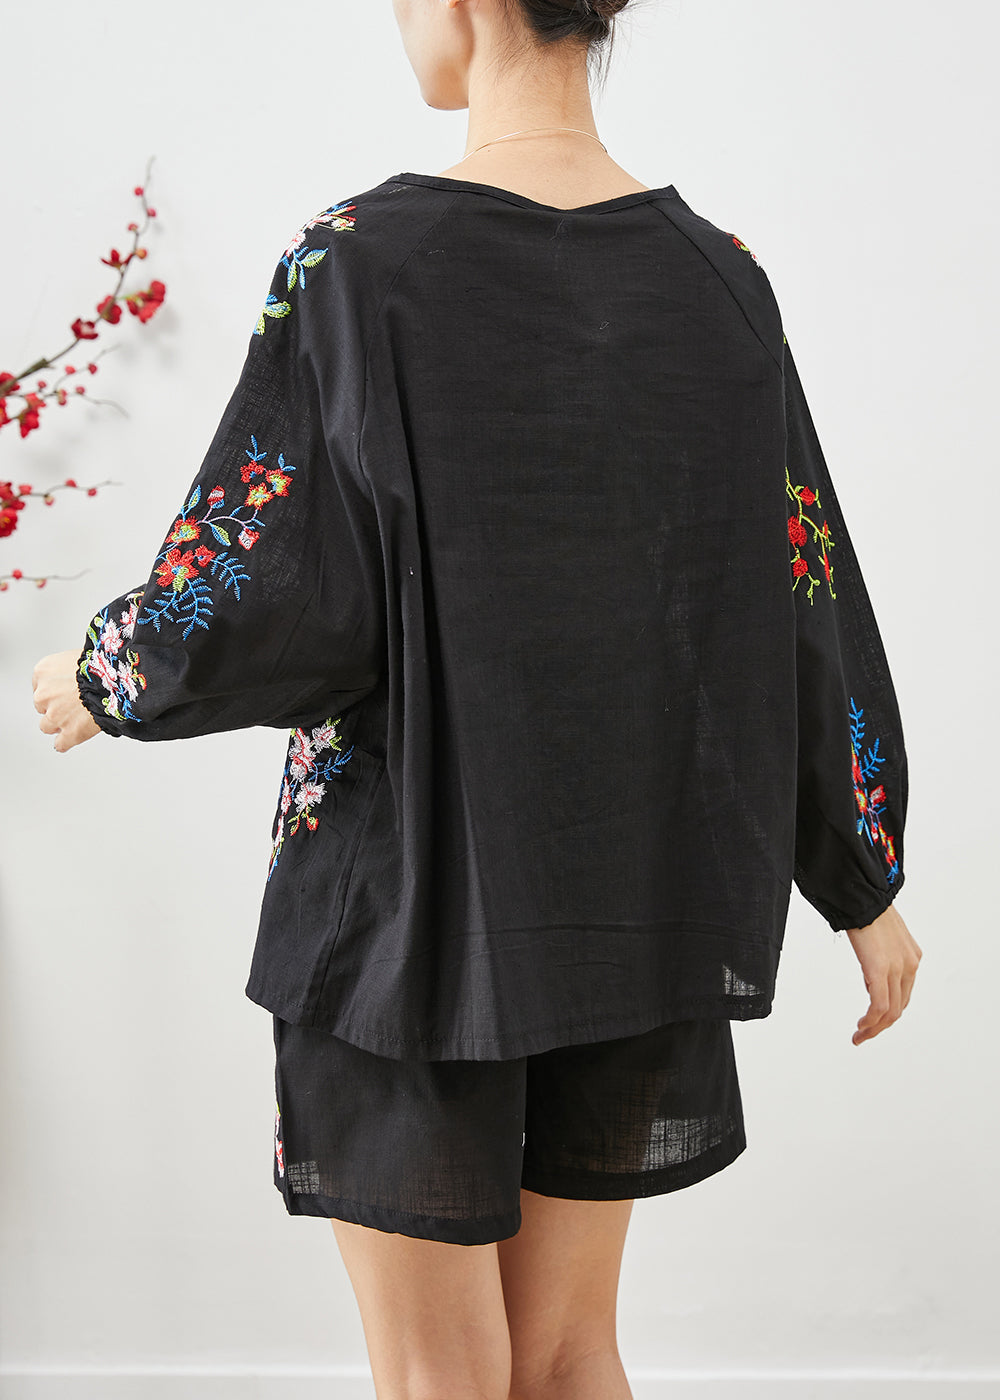 Elegant Black Embroideried Chinese Button Cotton Women Sets 2 Pieces Fall